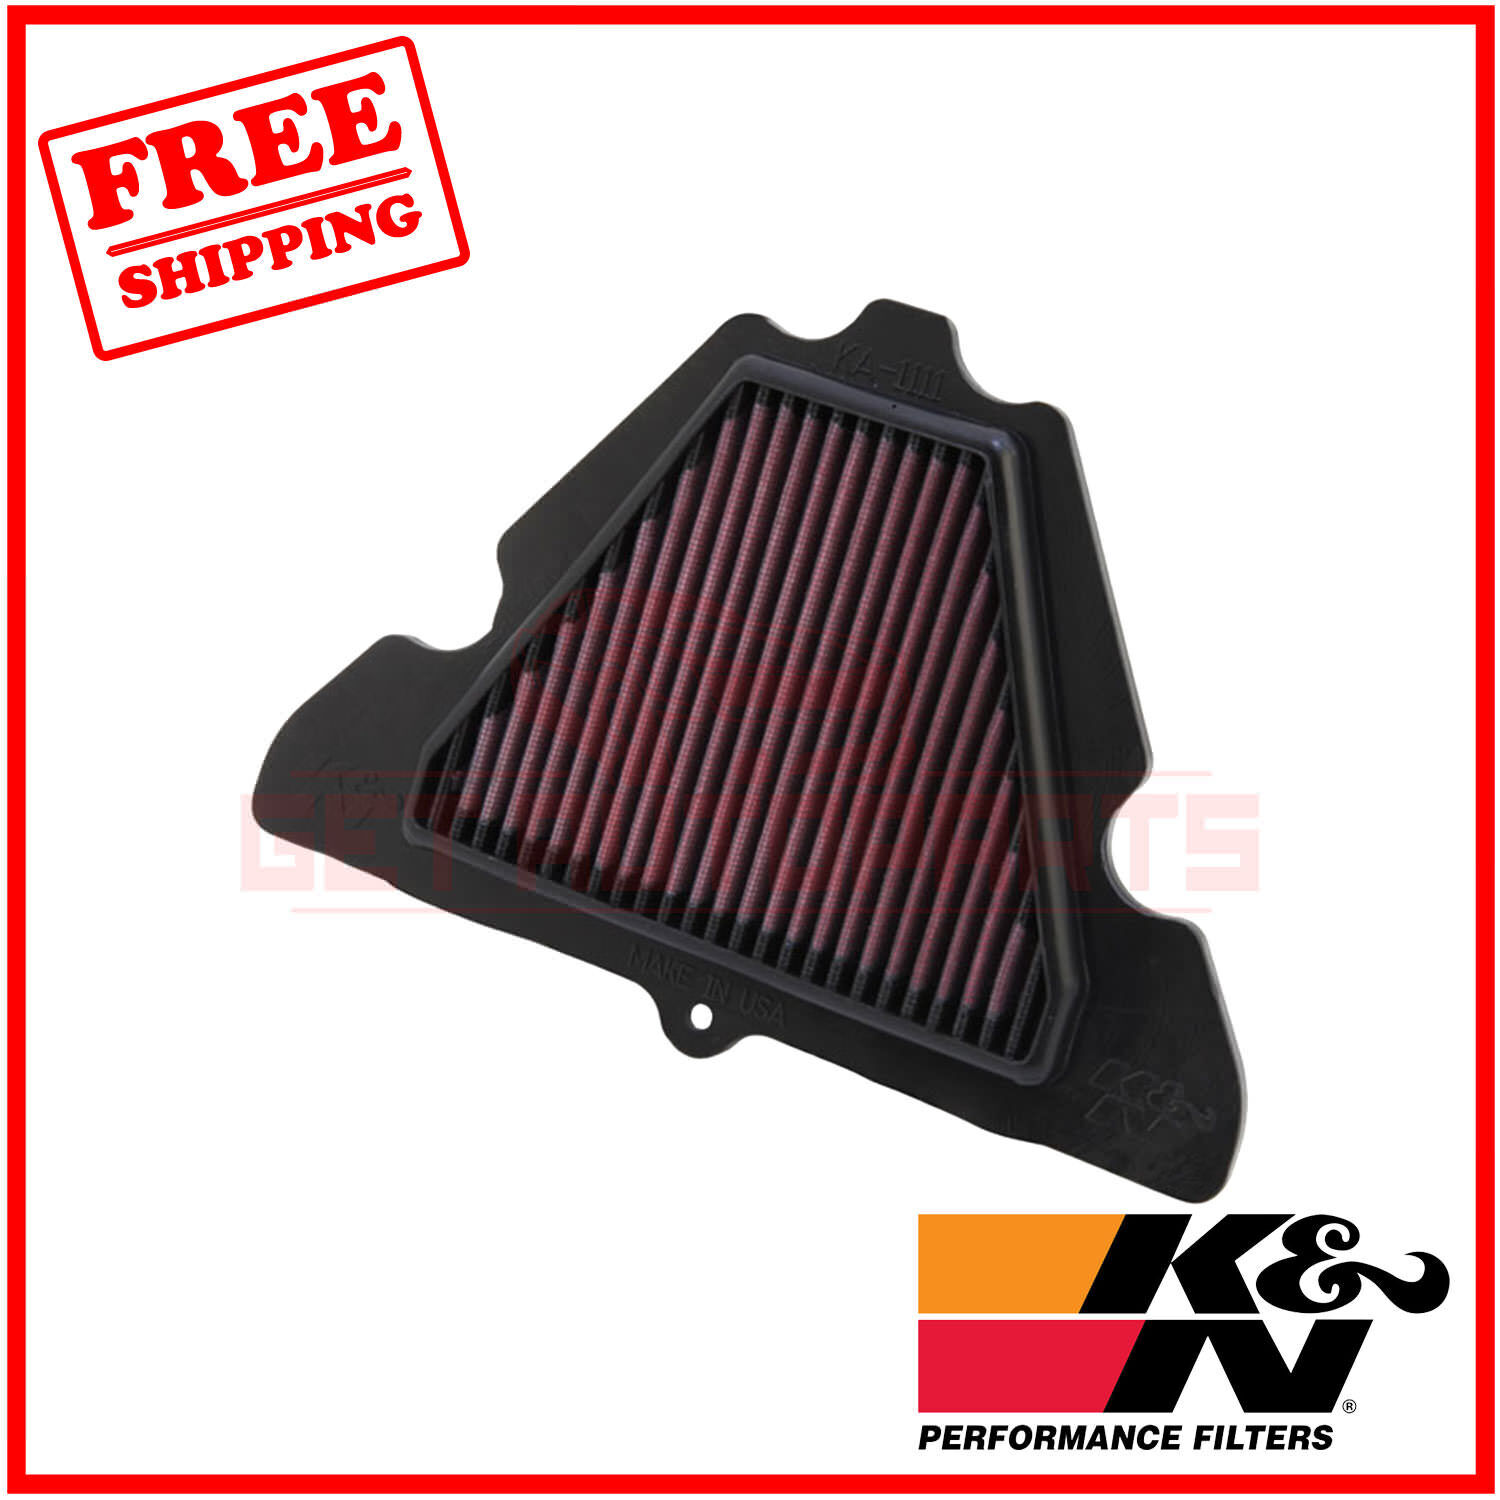 K&N Replacement Air Filter for Kawasaki ZR1000 Z1000 ABS 2014